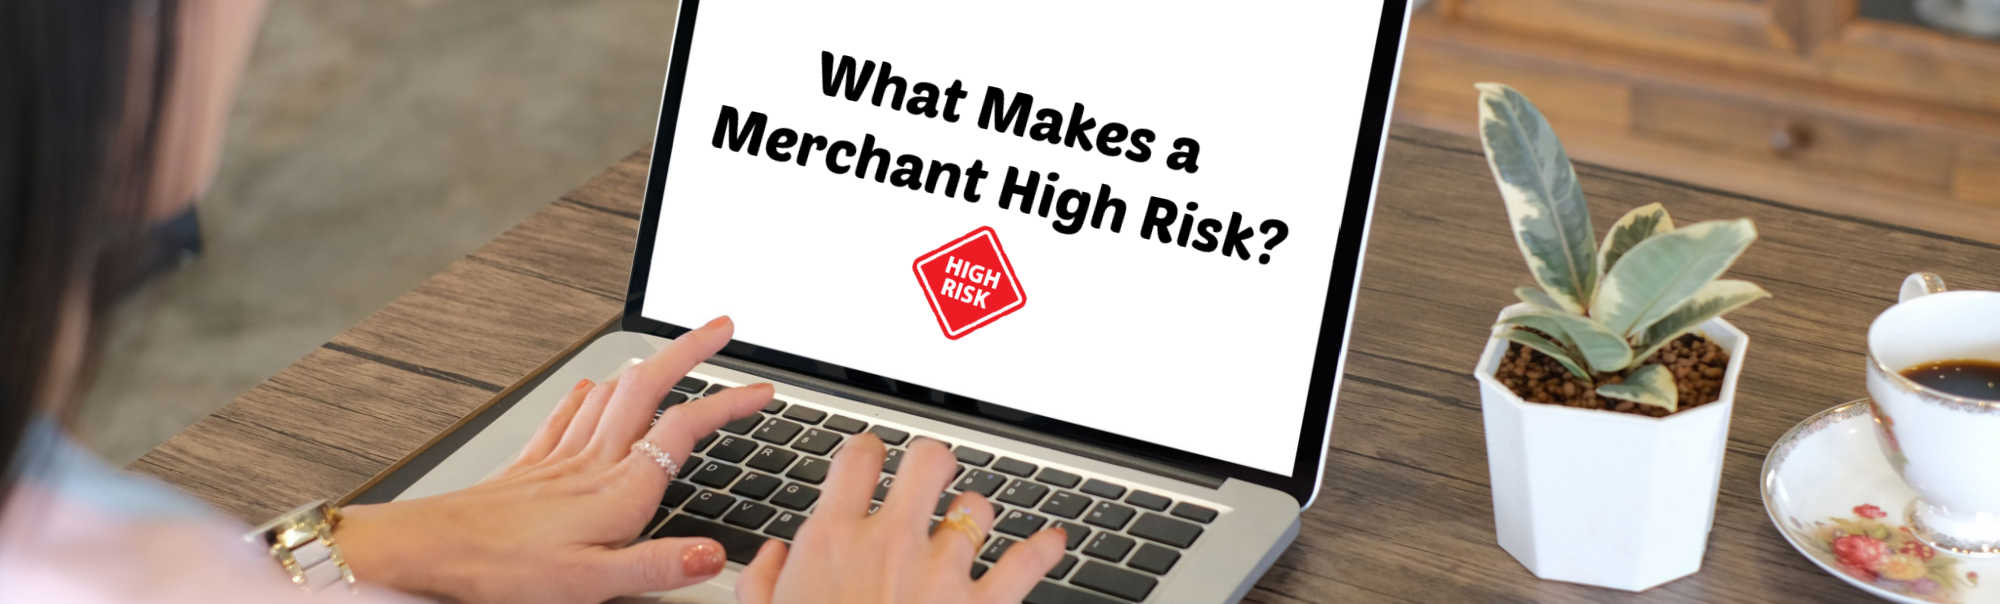 image of what makes a merchant high risk